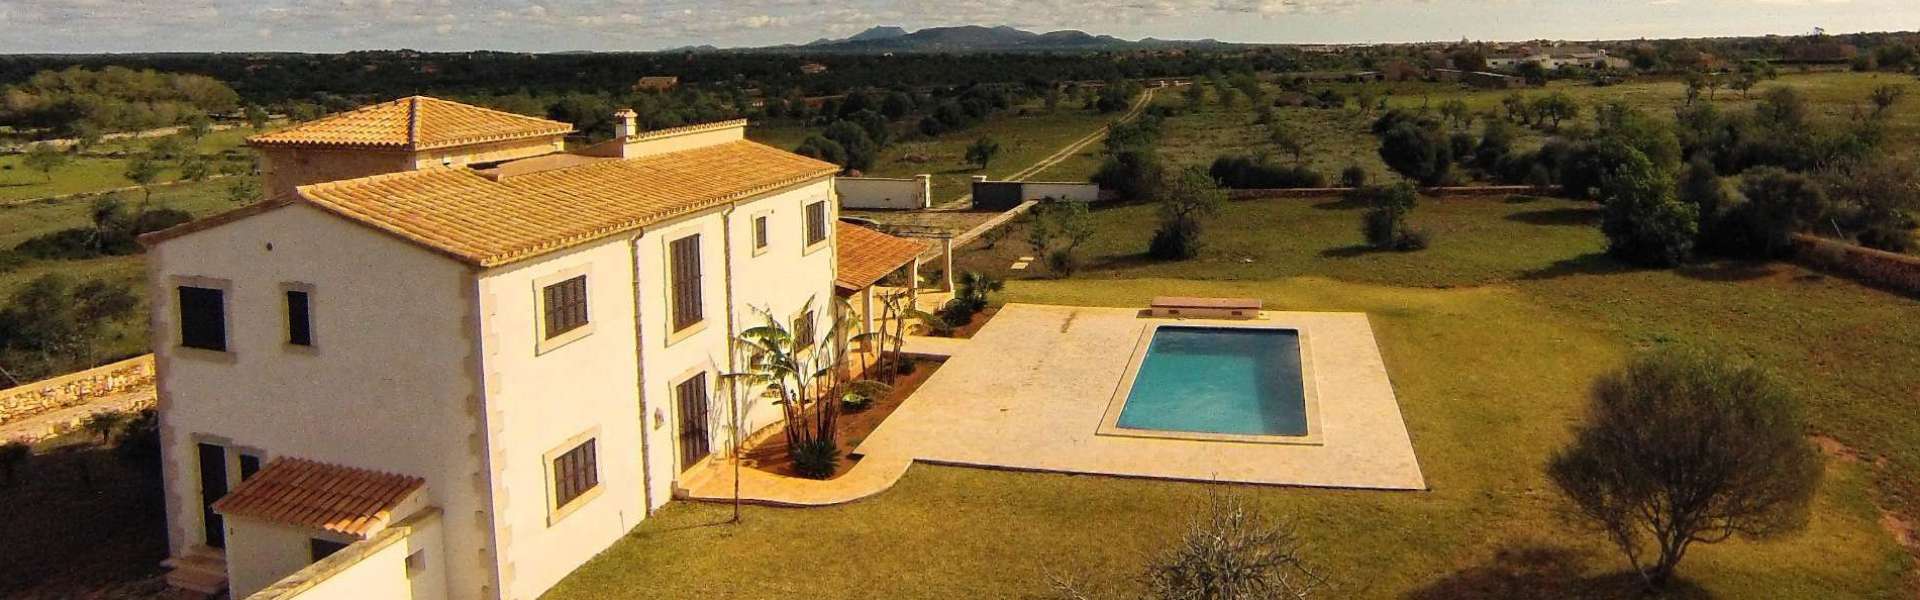 Country house in Es Llombards with additional approved building project 